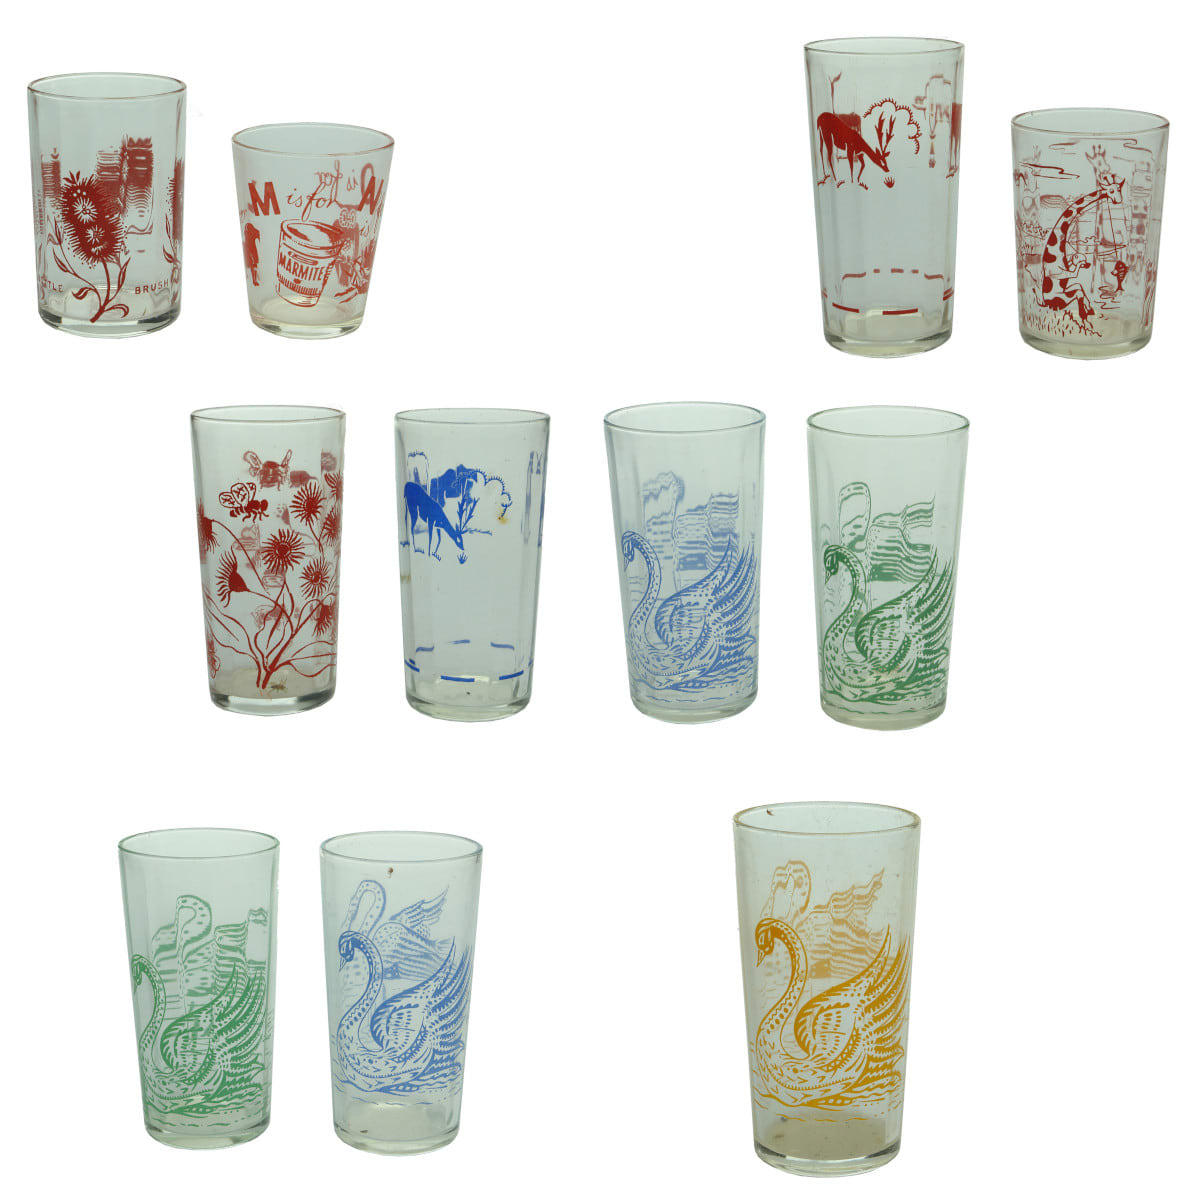 11 Ceramic label decorated glasses. Flowers, Animals, Bottle Brush, Giraffes, Letters M to O, 5 x Swans.